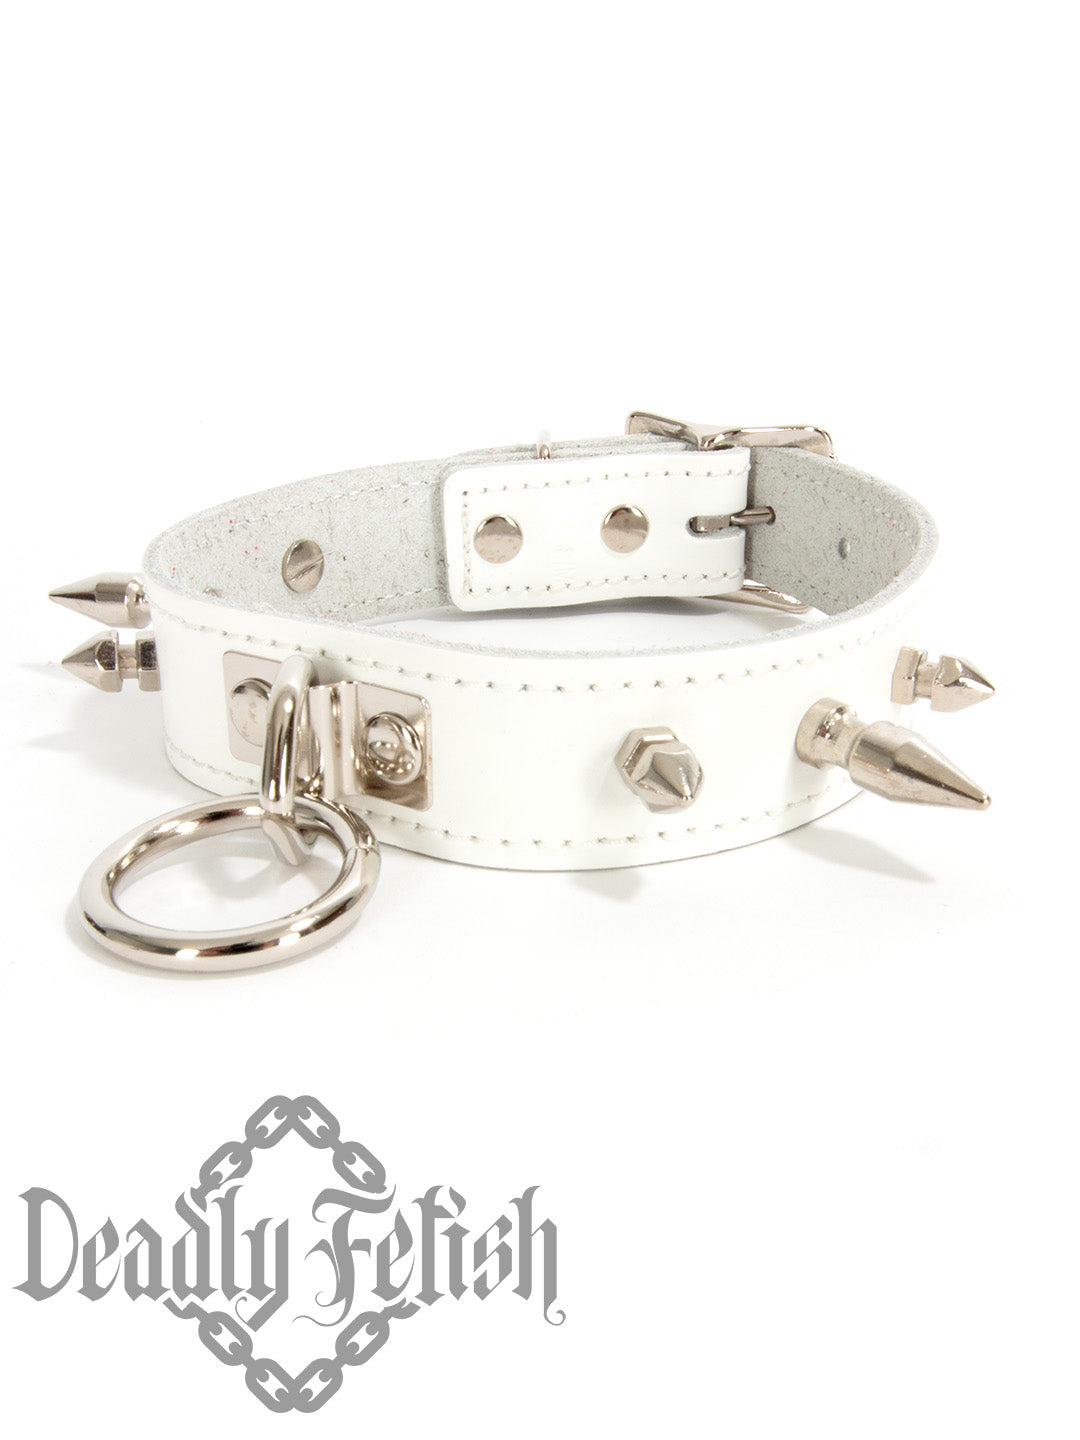 Deadly Fetish Leather: Collar #10